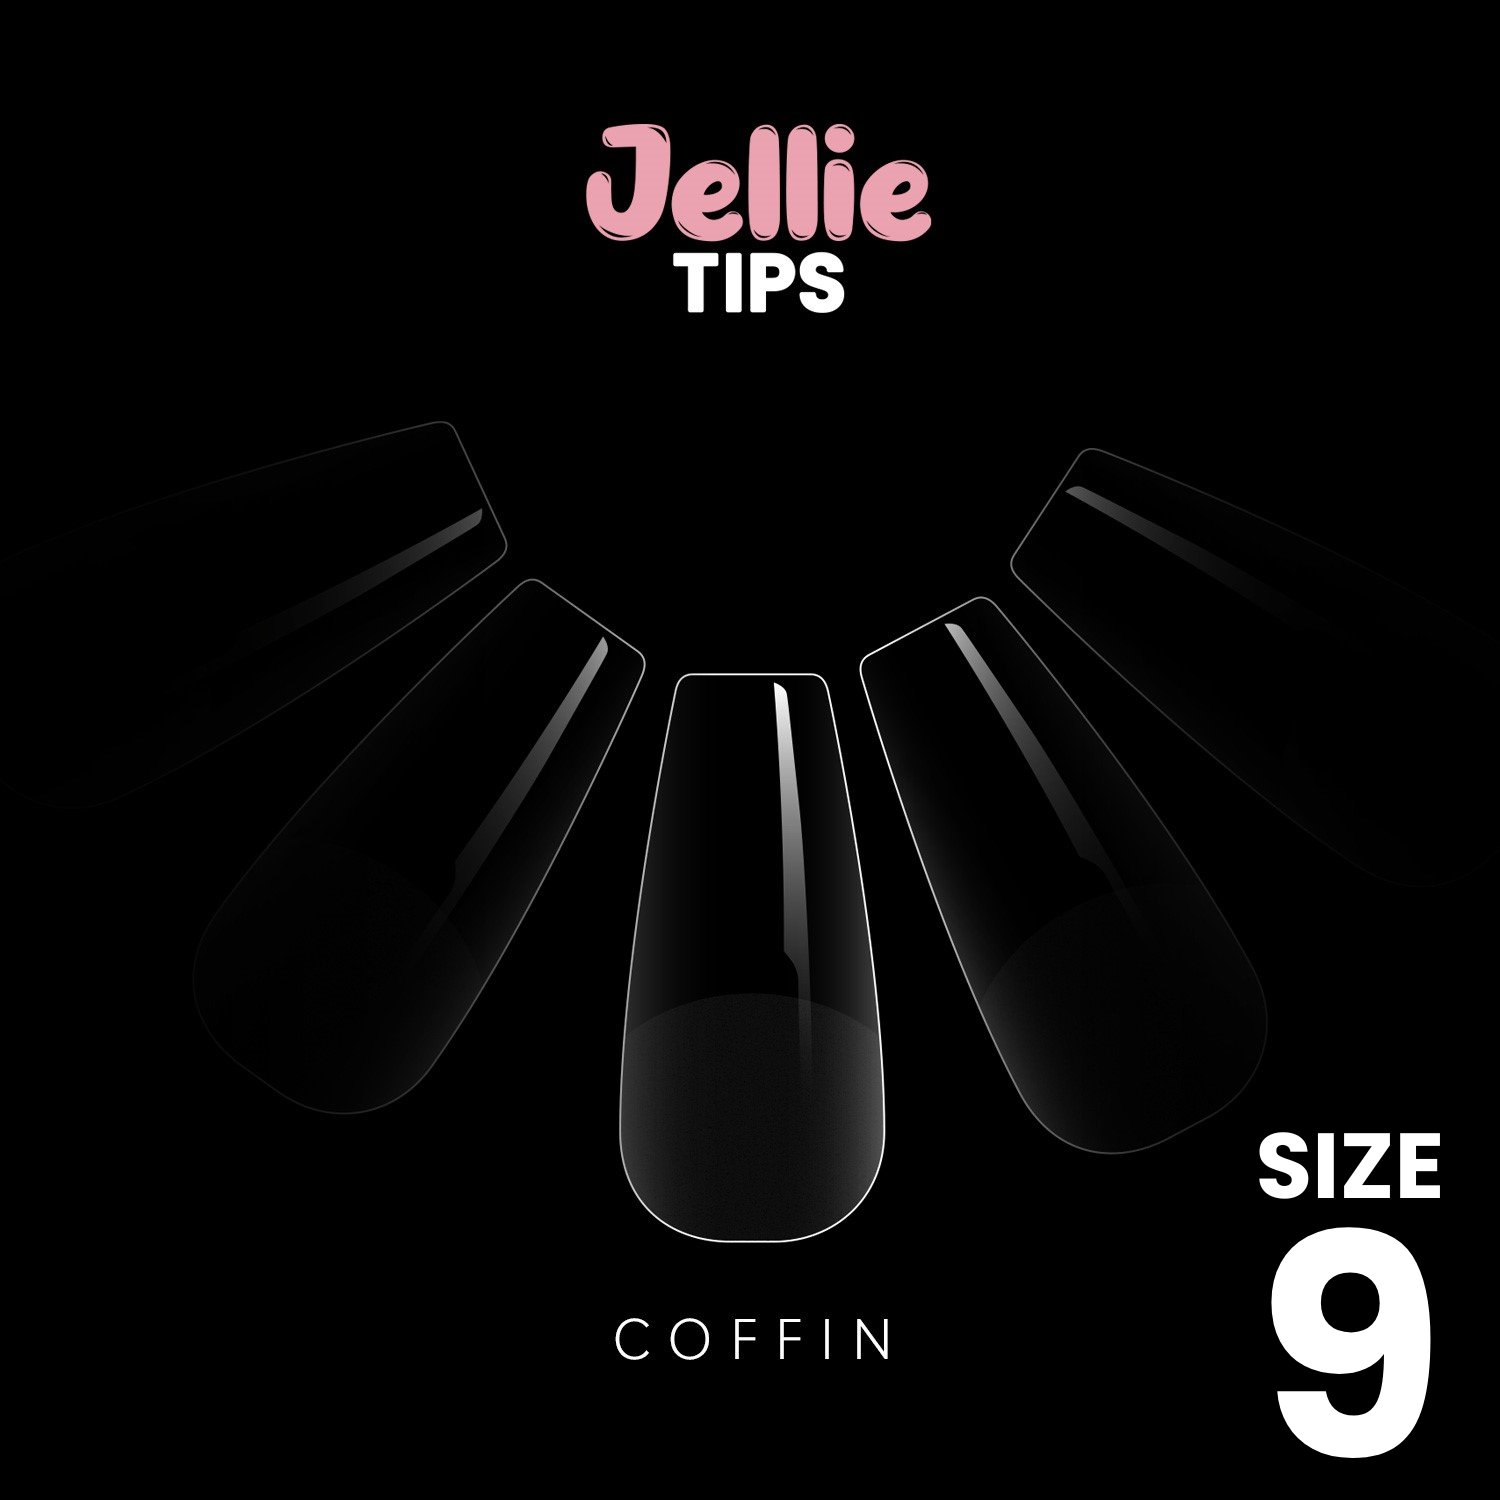 Halo Jellie Nail Tips Coffin, Sizes 9, 50 One Size